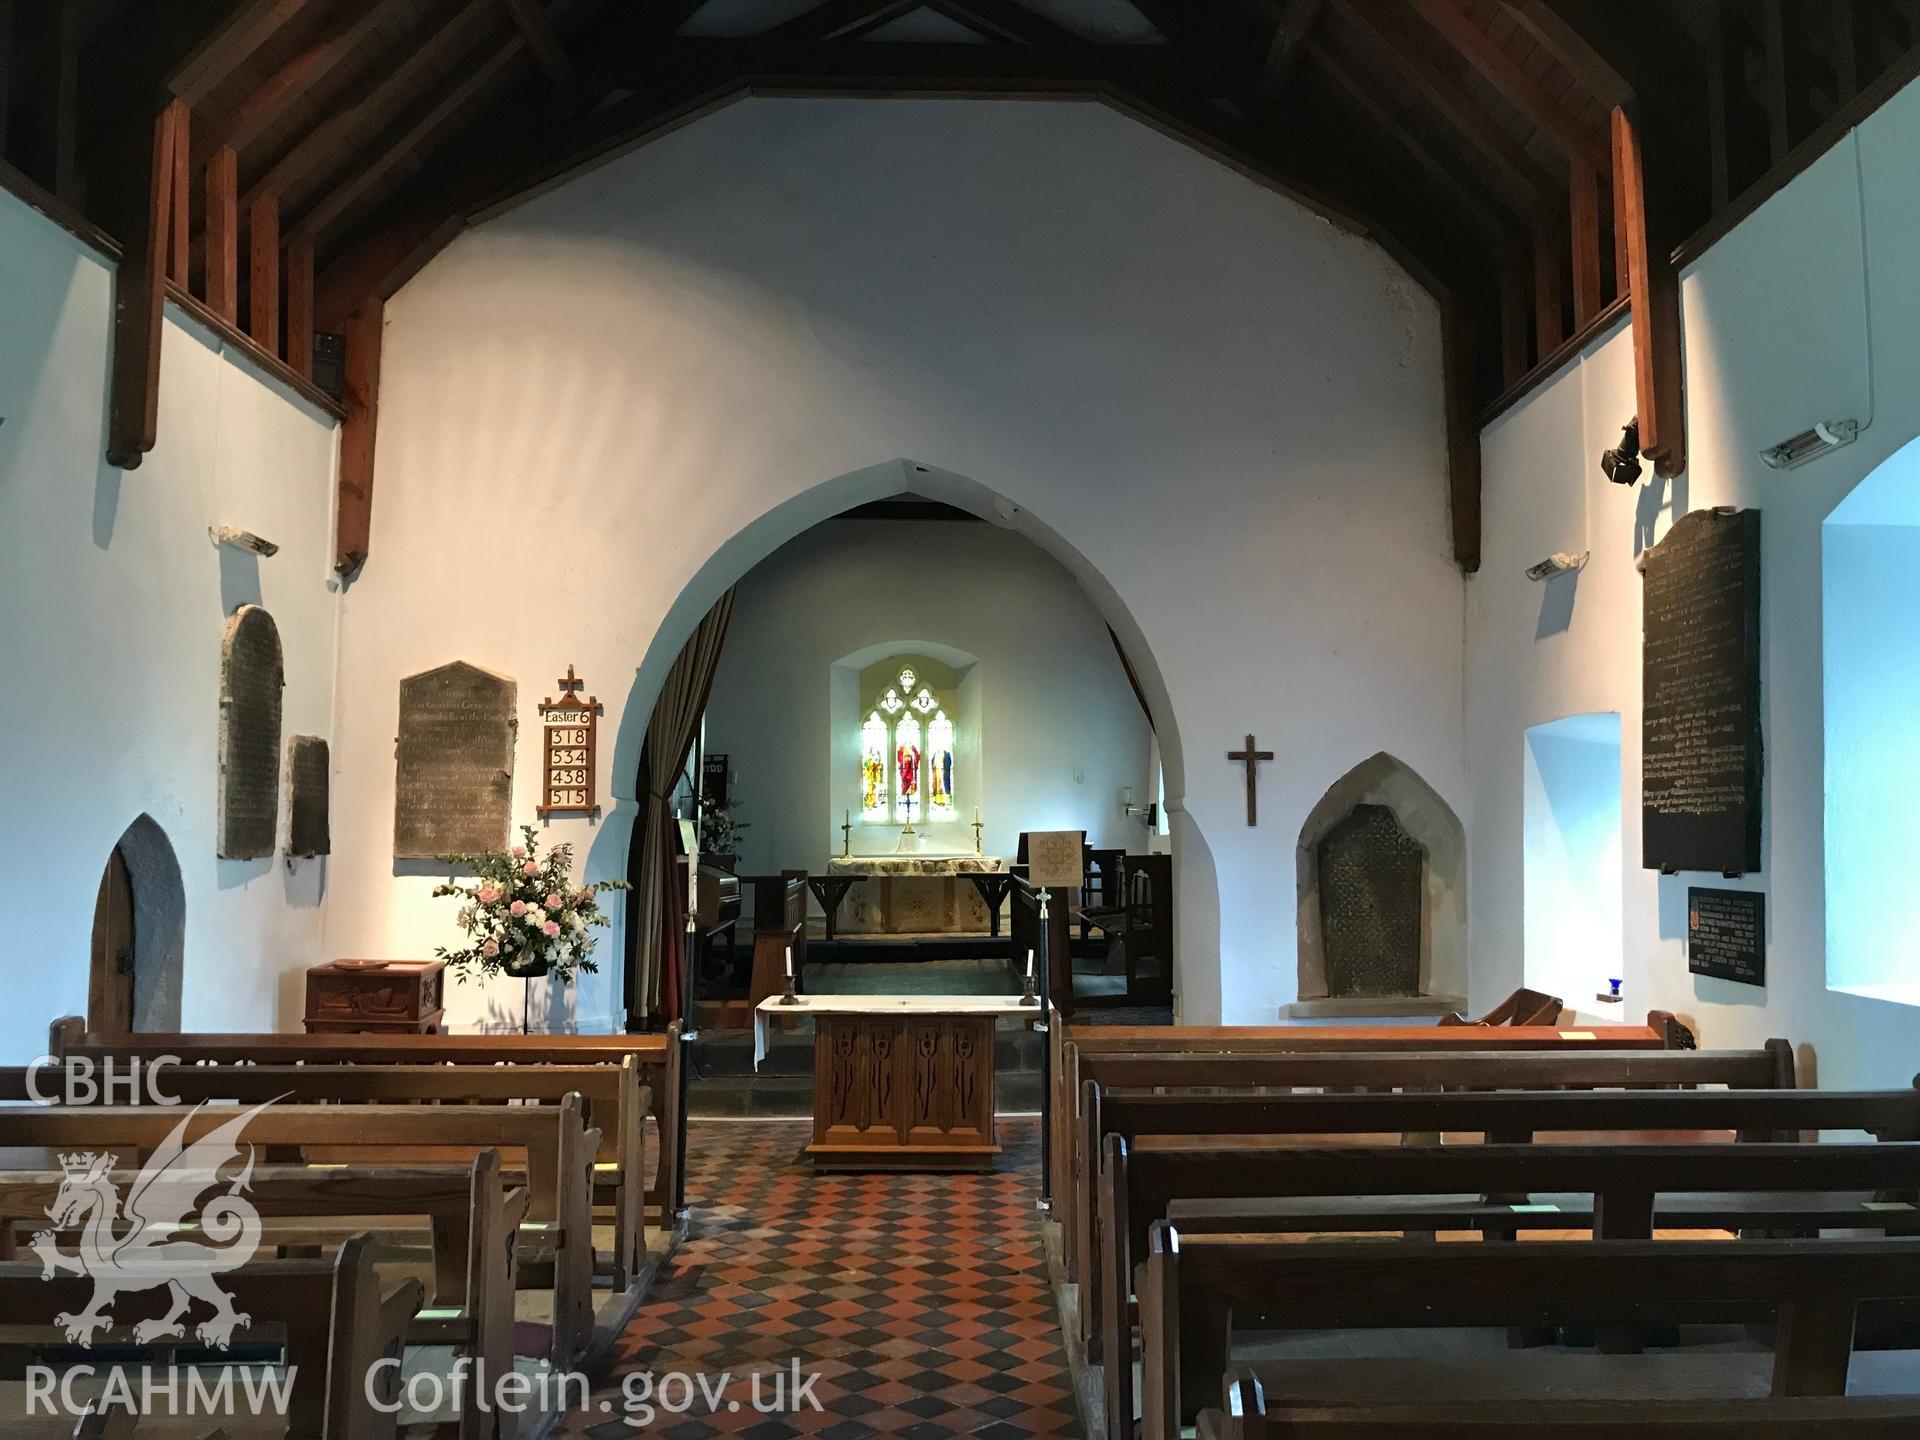 Colour photo showing interior of St. Cenydd's Church, Llangenydd, taken by Paul R. Davis, 10th May 2018.